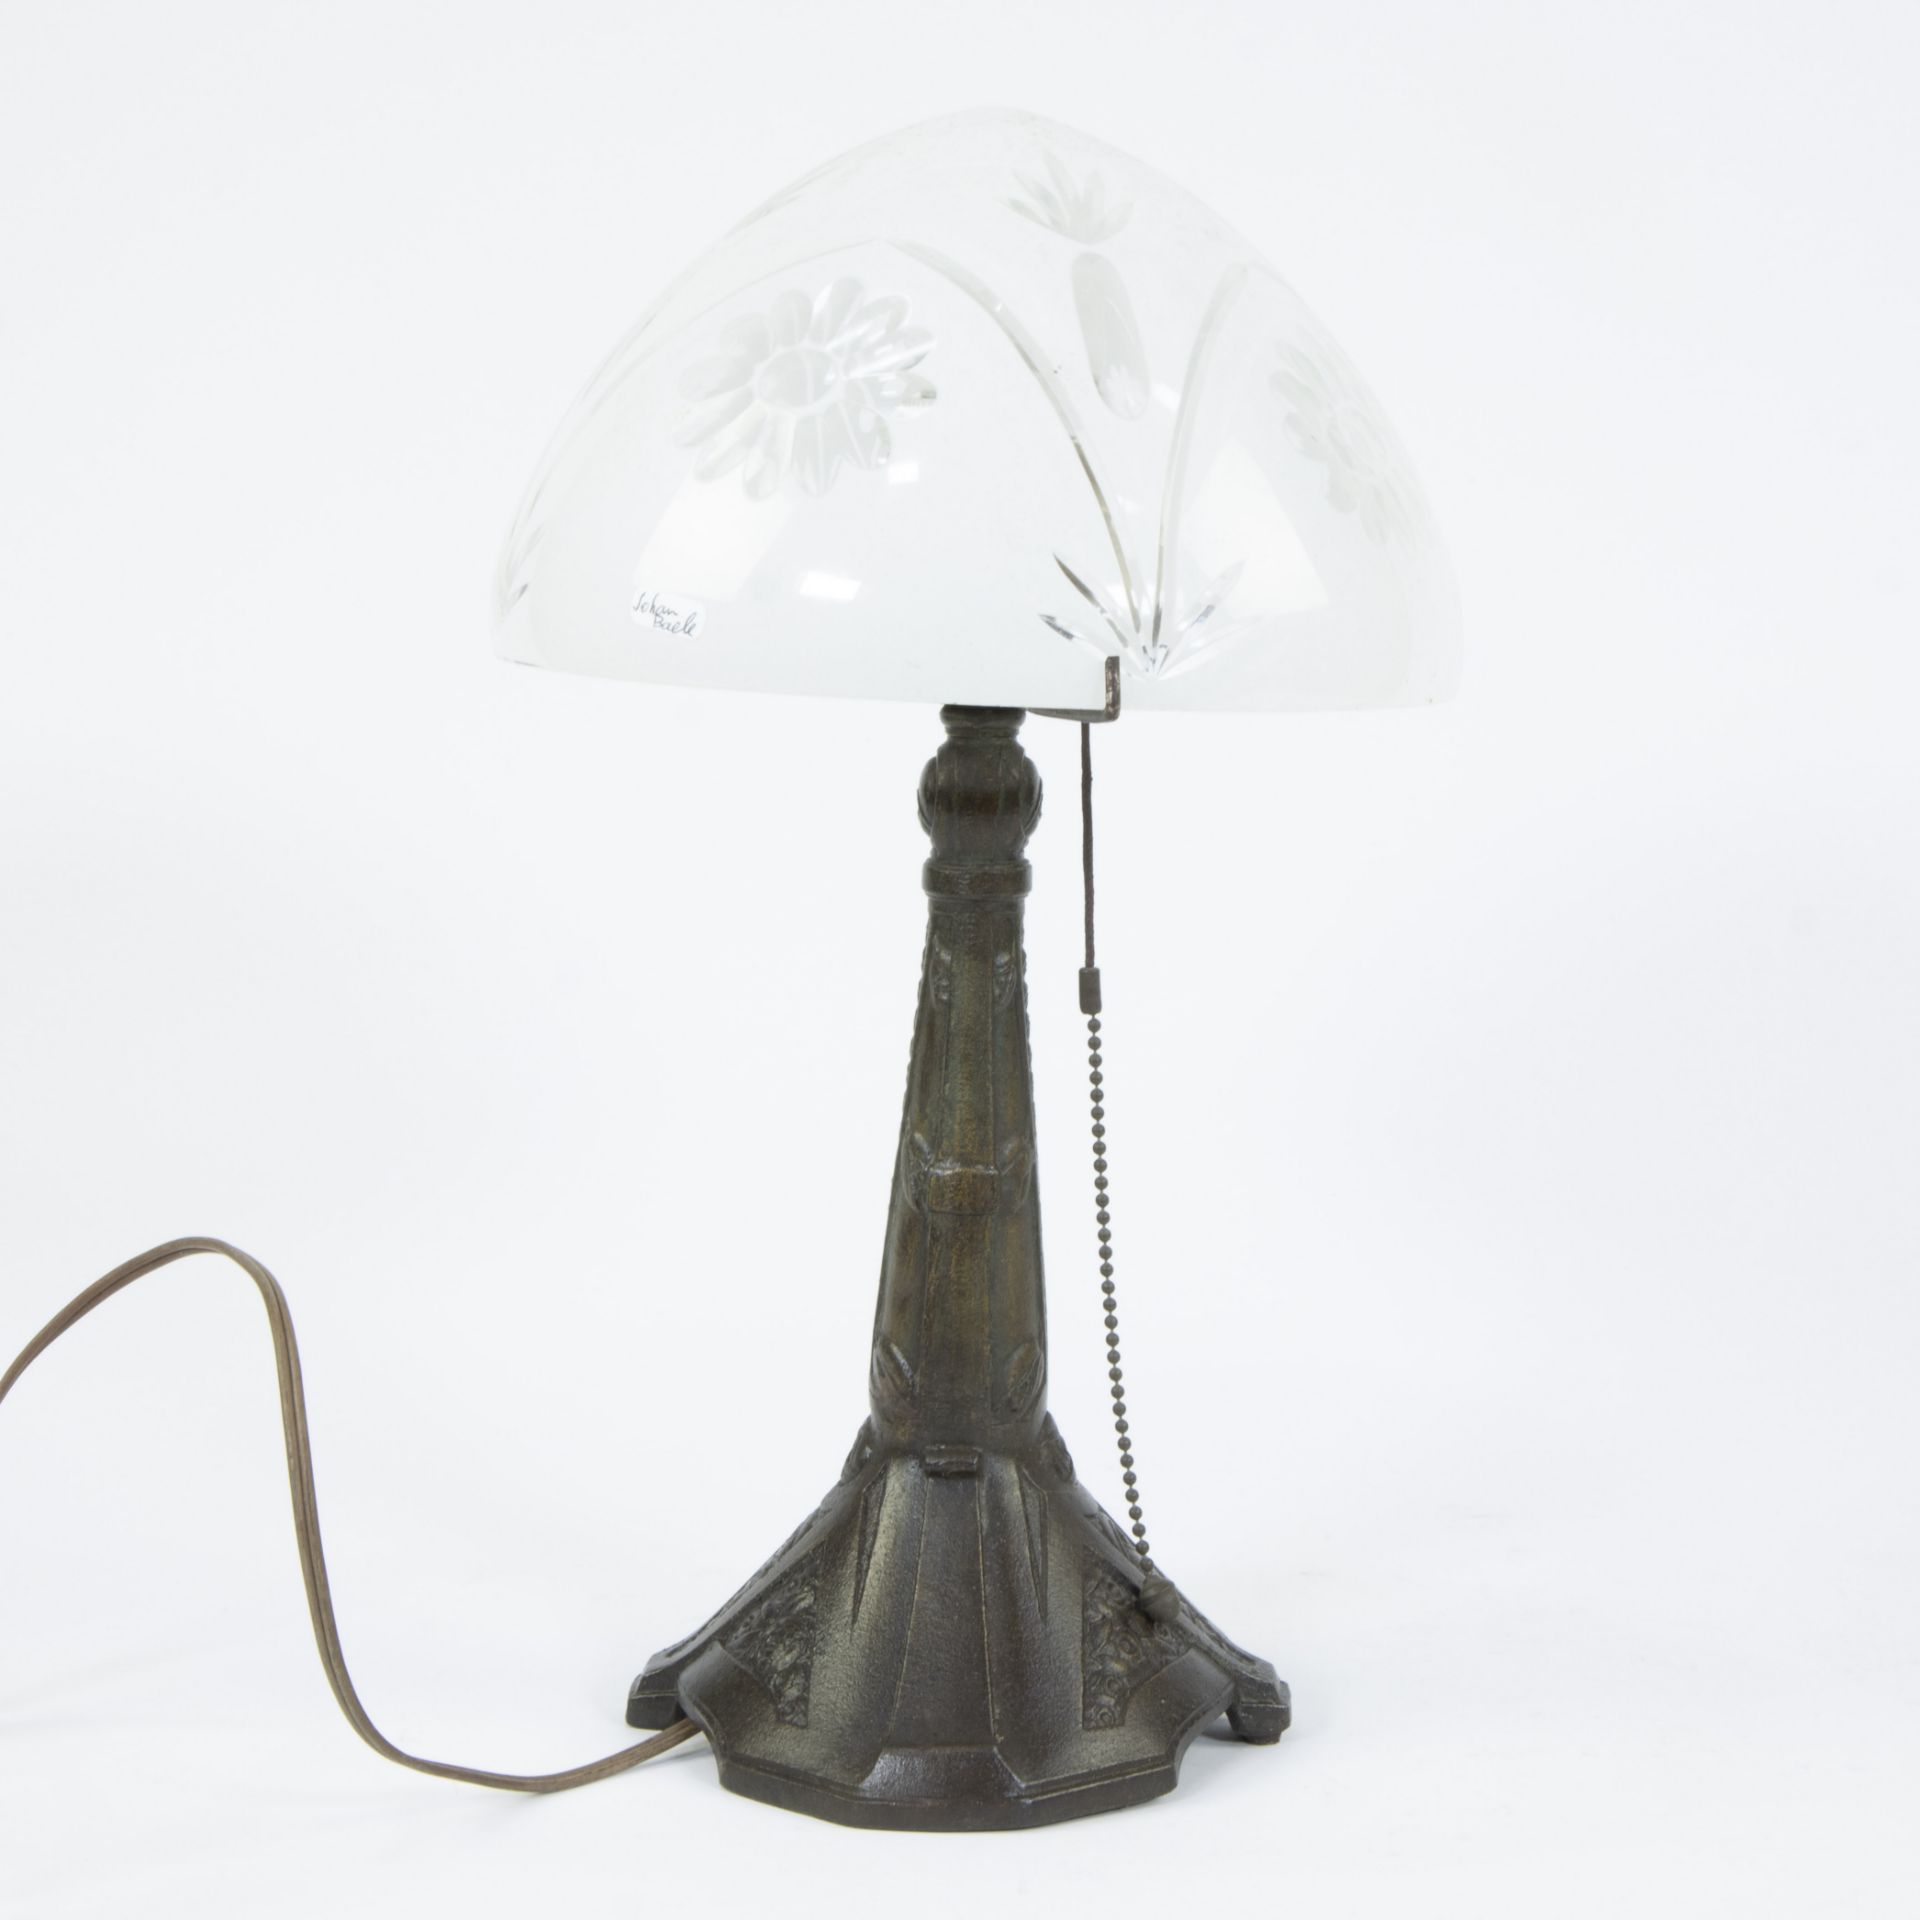 Art Deco mushroom lamp with bronze base and glass shade - Image 3 of 4